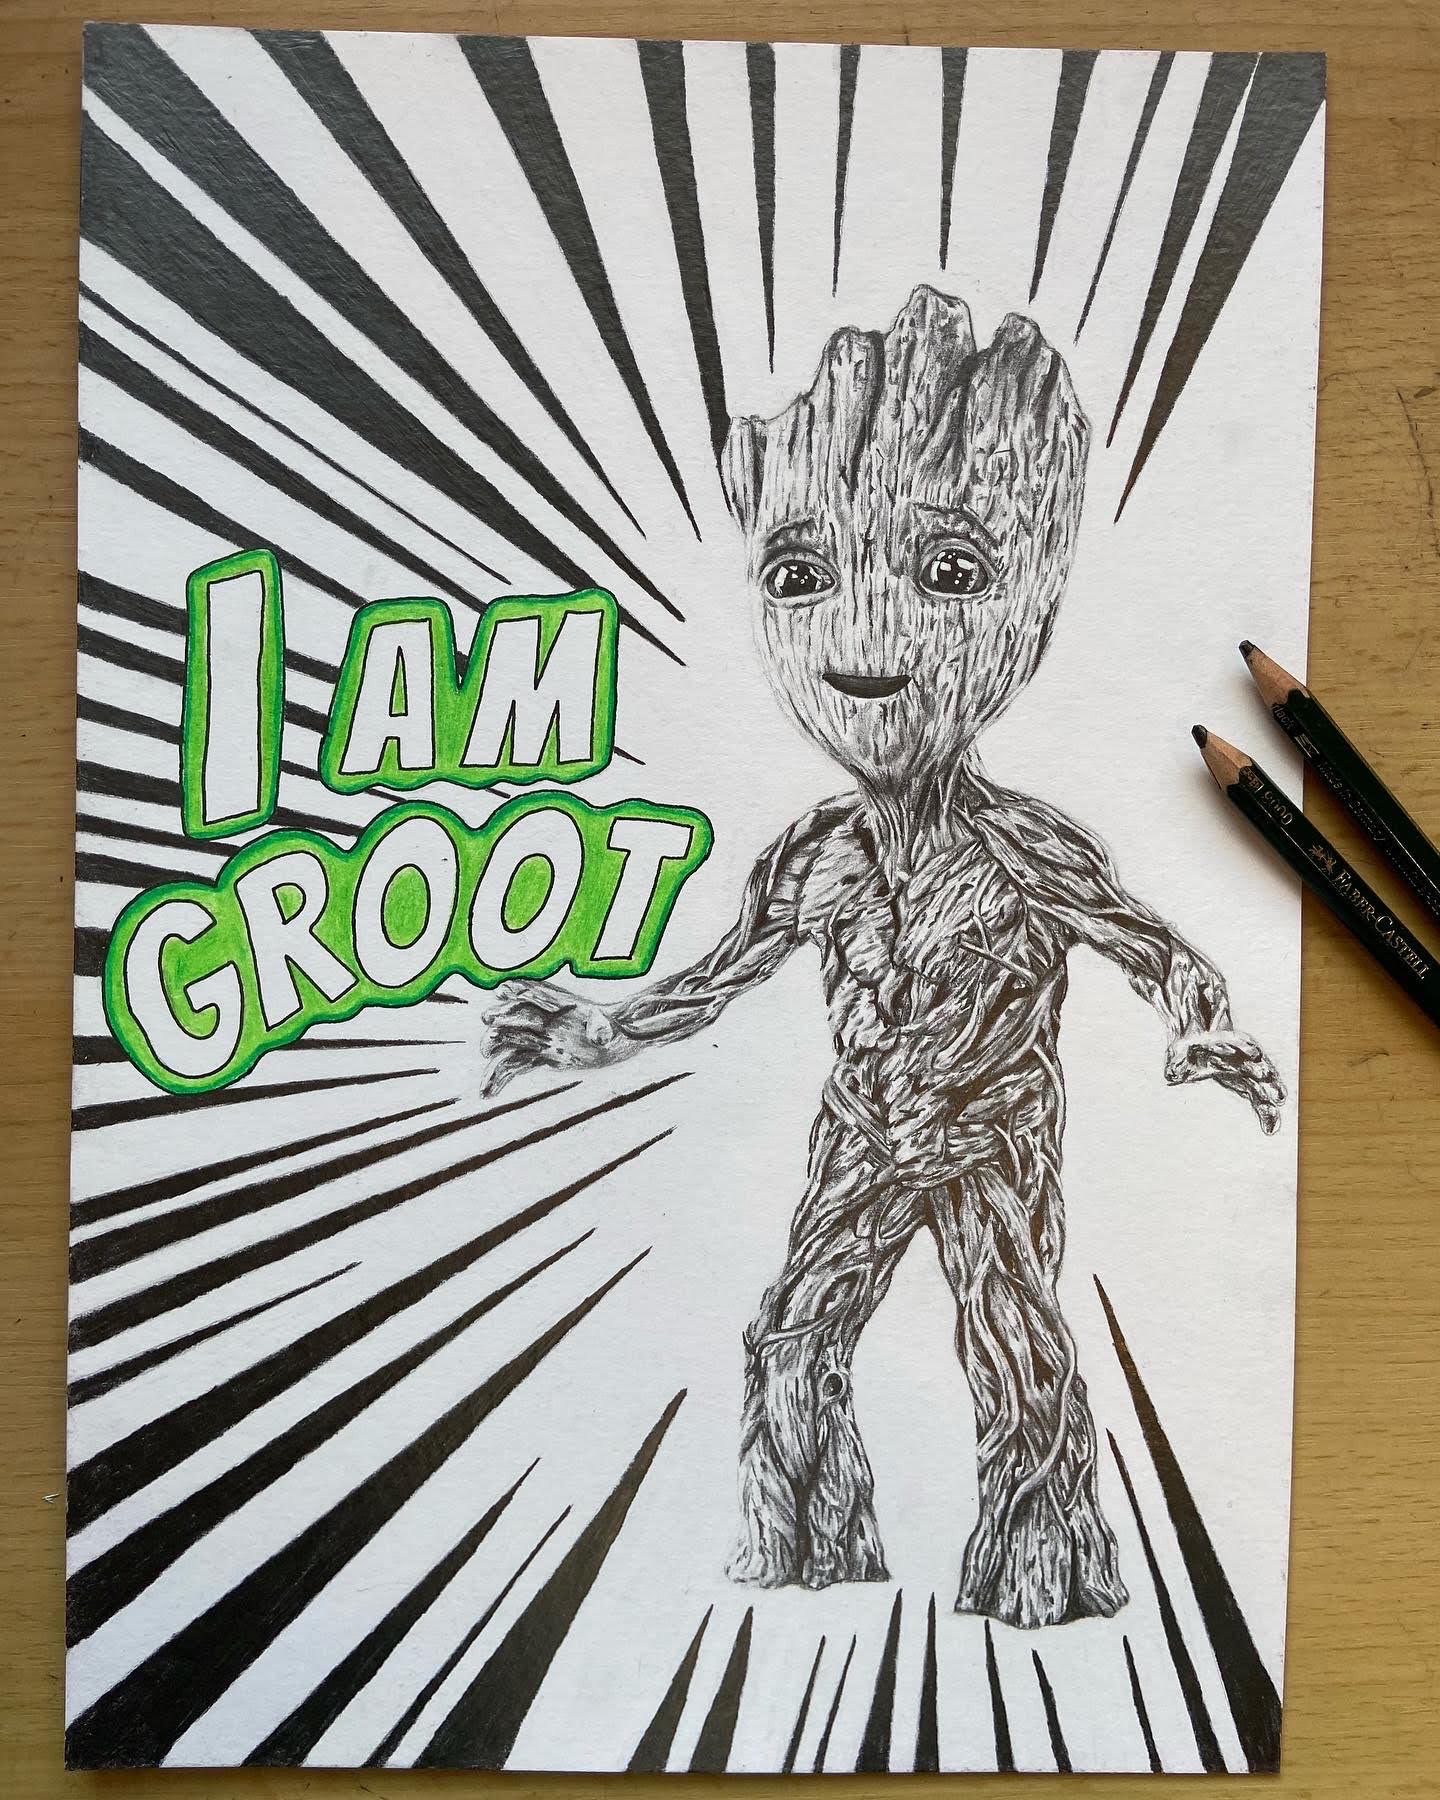 Pencil drawing of Groot from Guardians of the Galaxy